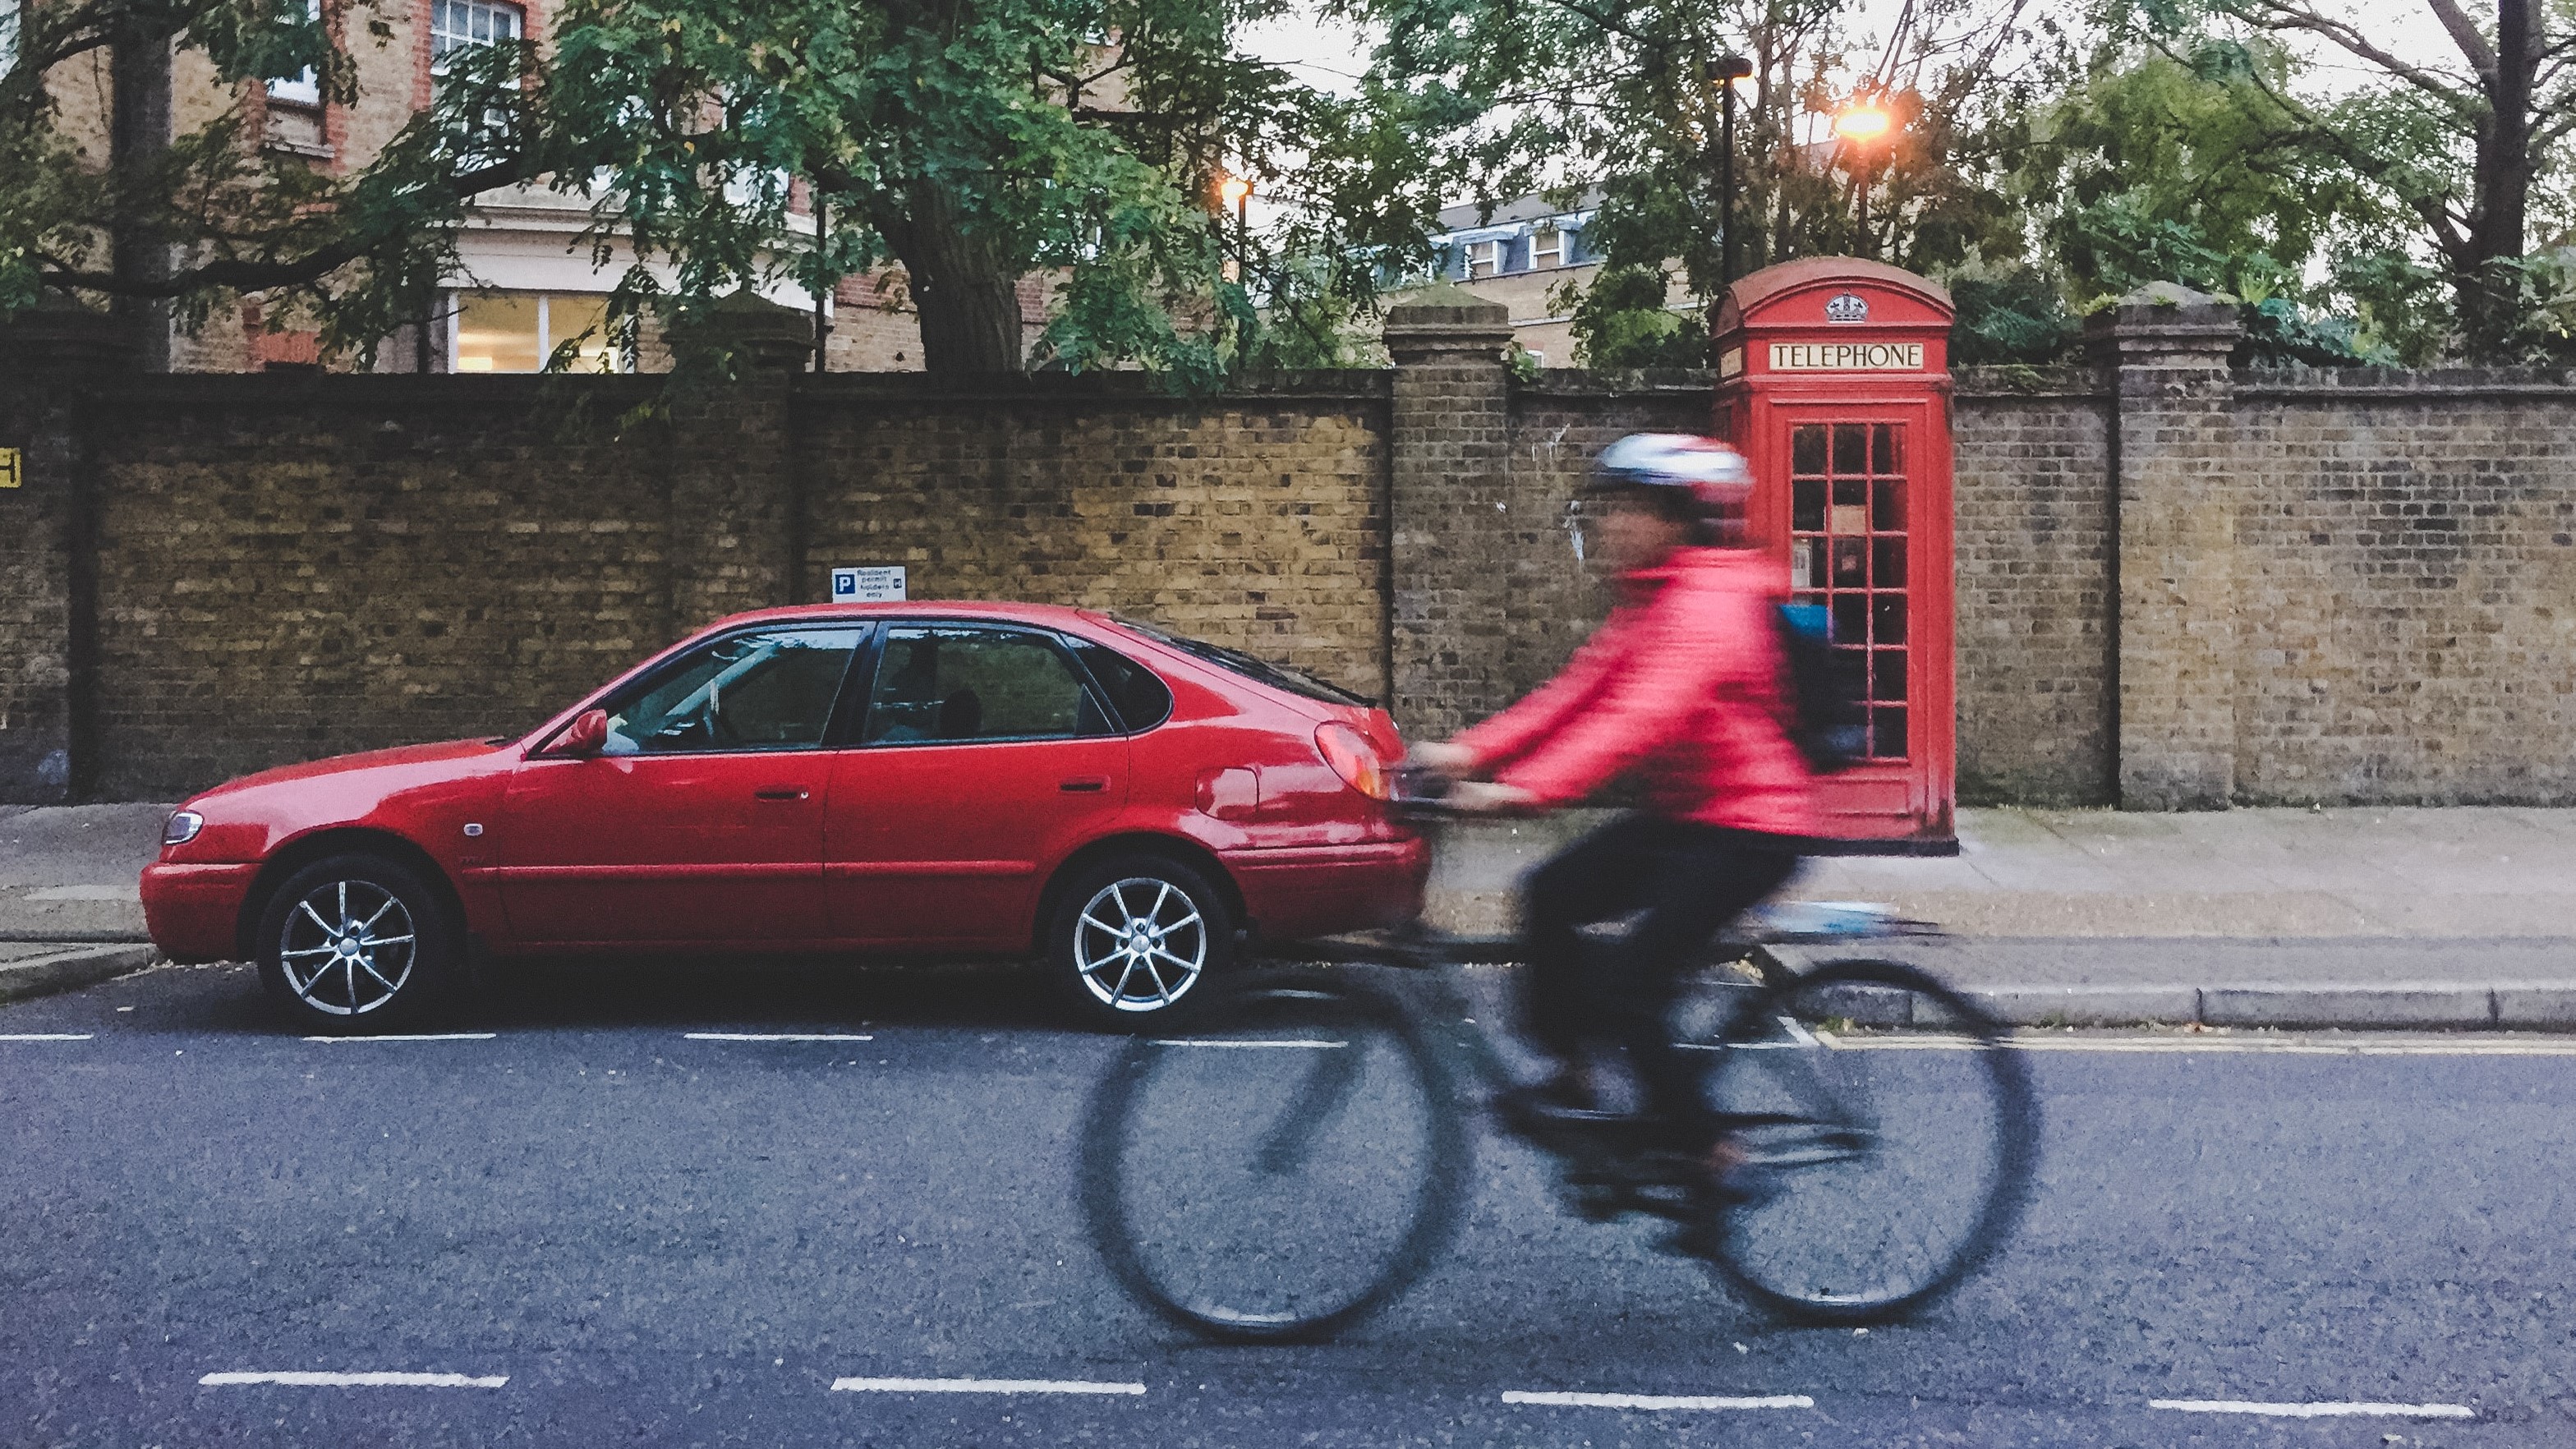 Revised UK Highway Code rules give cyclists and pedestrians priority over drivers